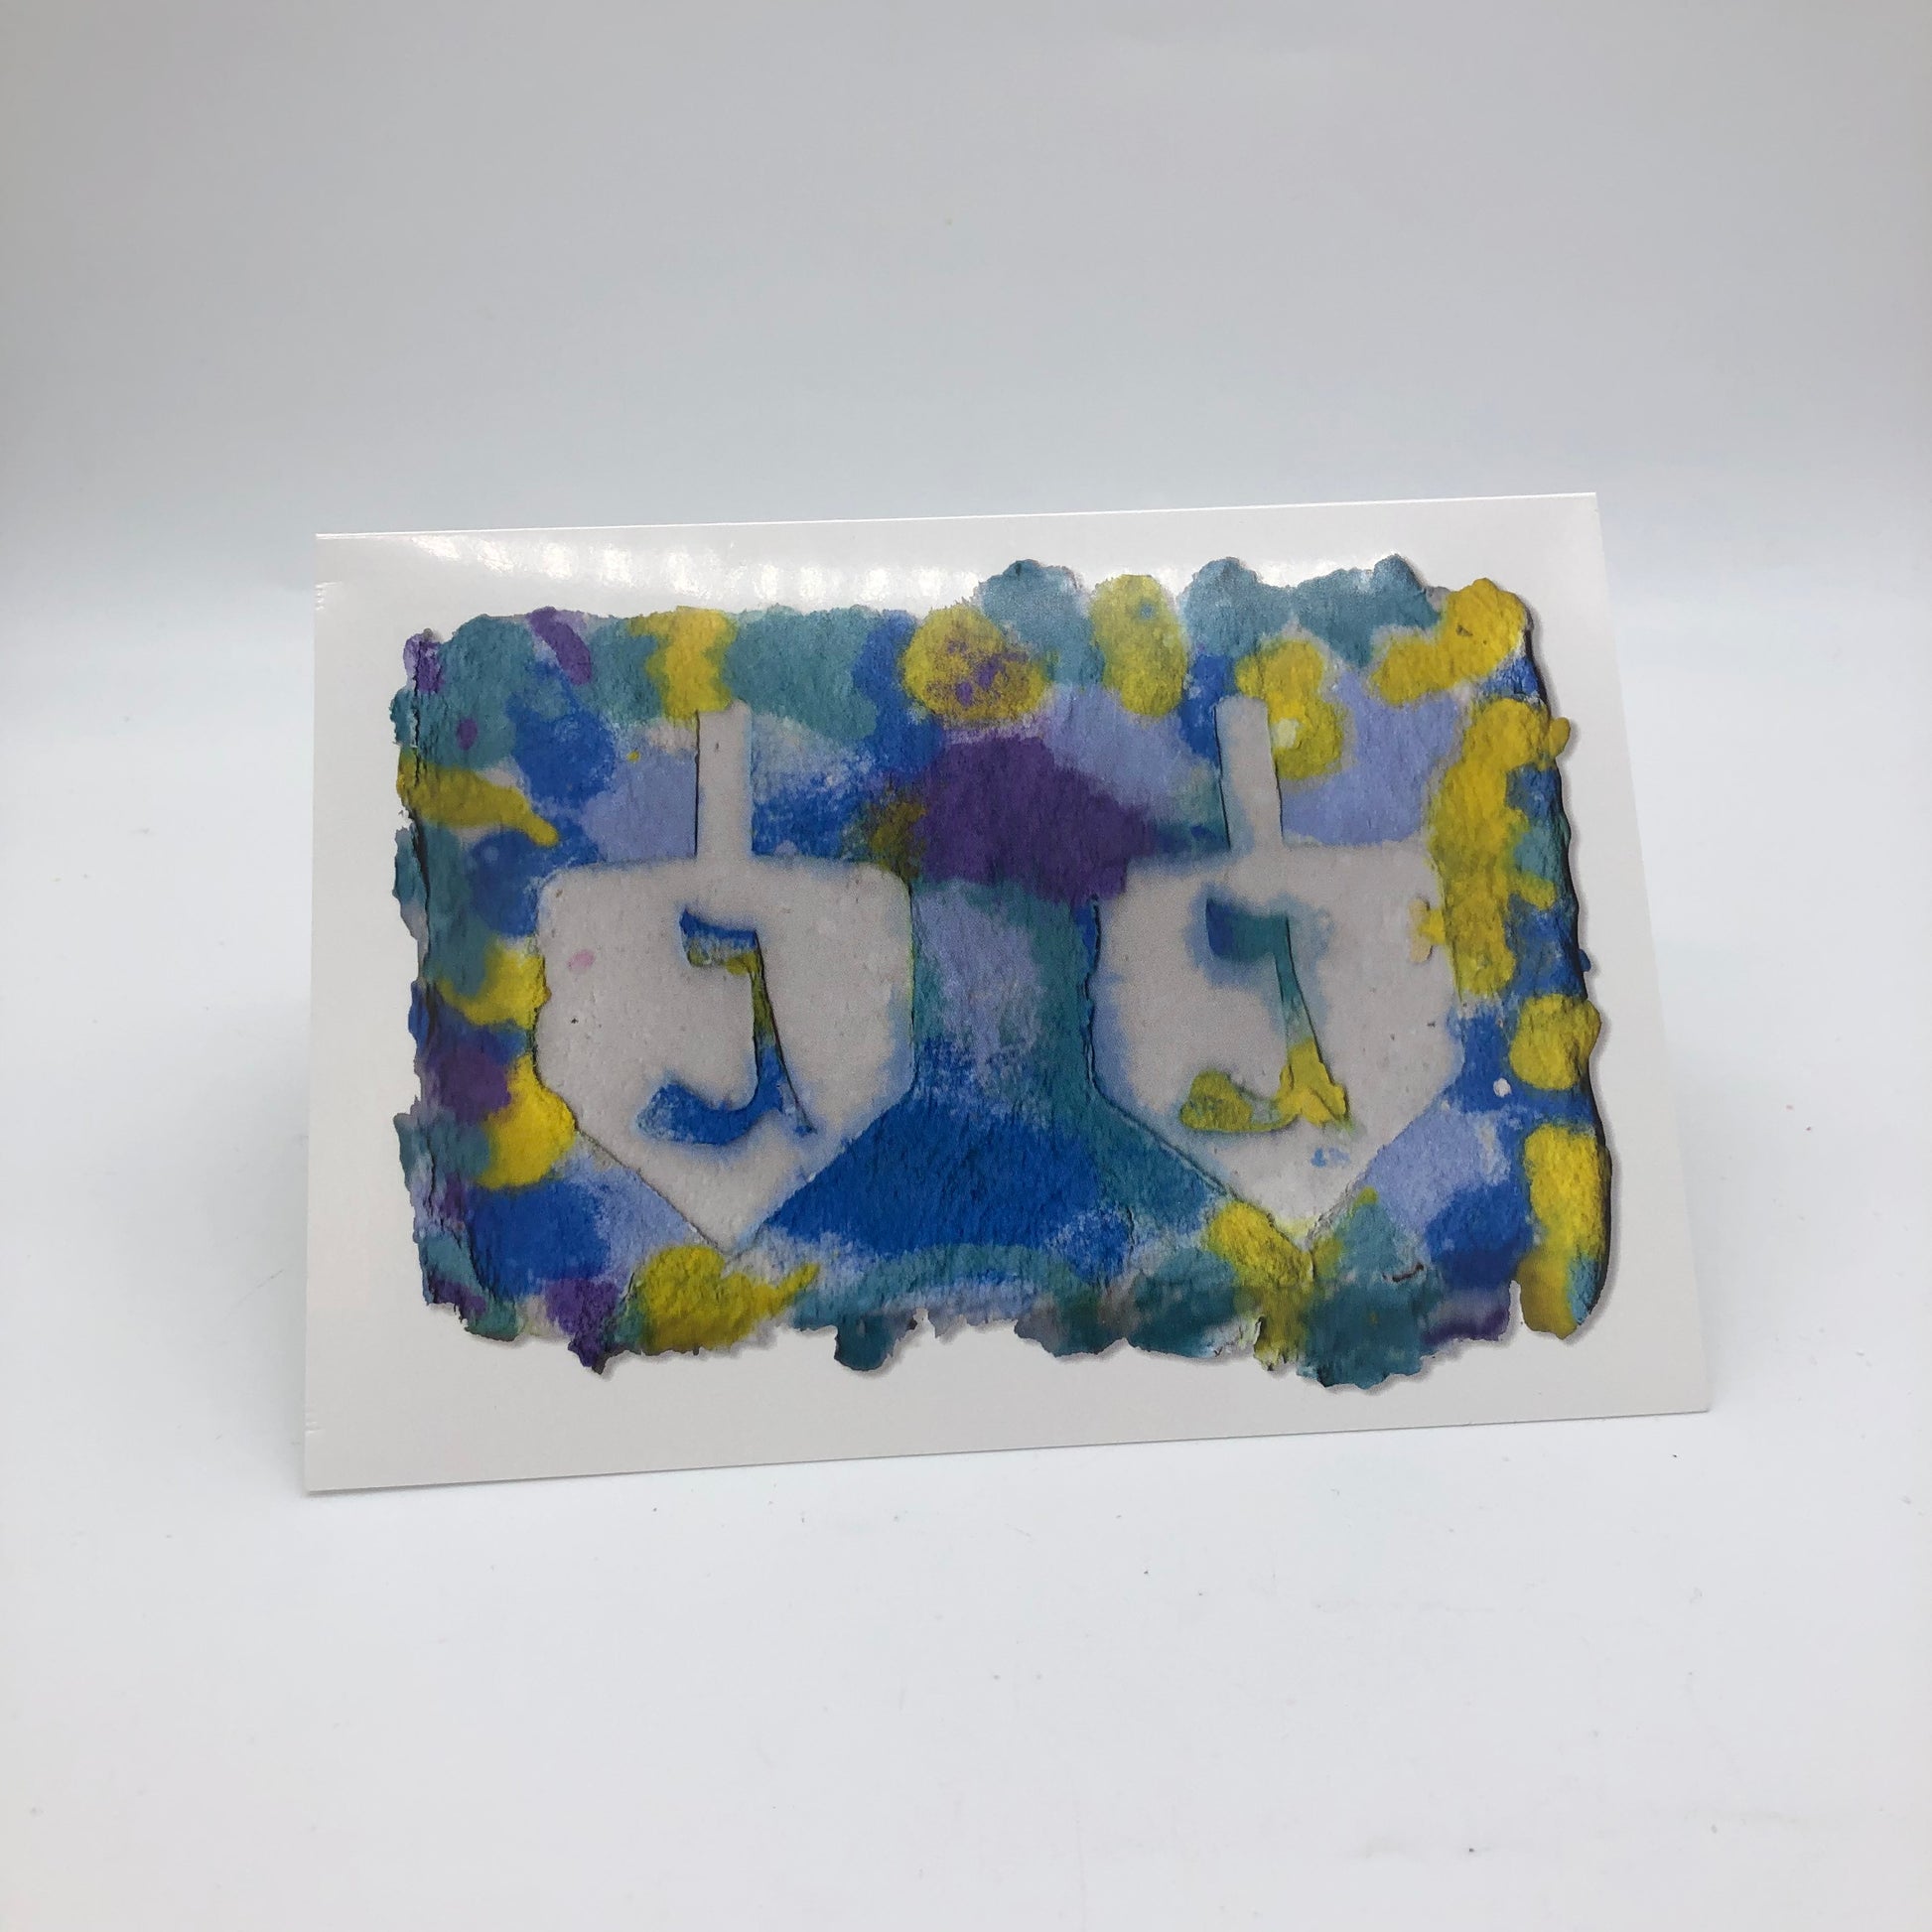 White greeting card with the printed image of handmade paper in shades of yellow, blue and a little bit of purple.  There are two large dreidels side by side with the Hebrew symbol 